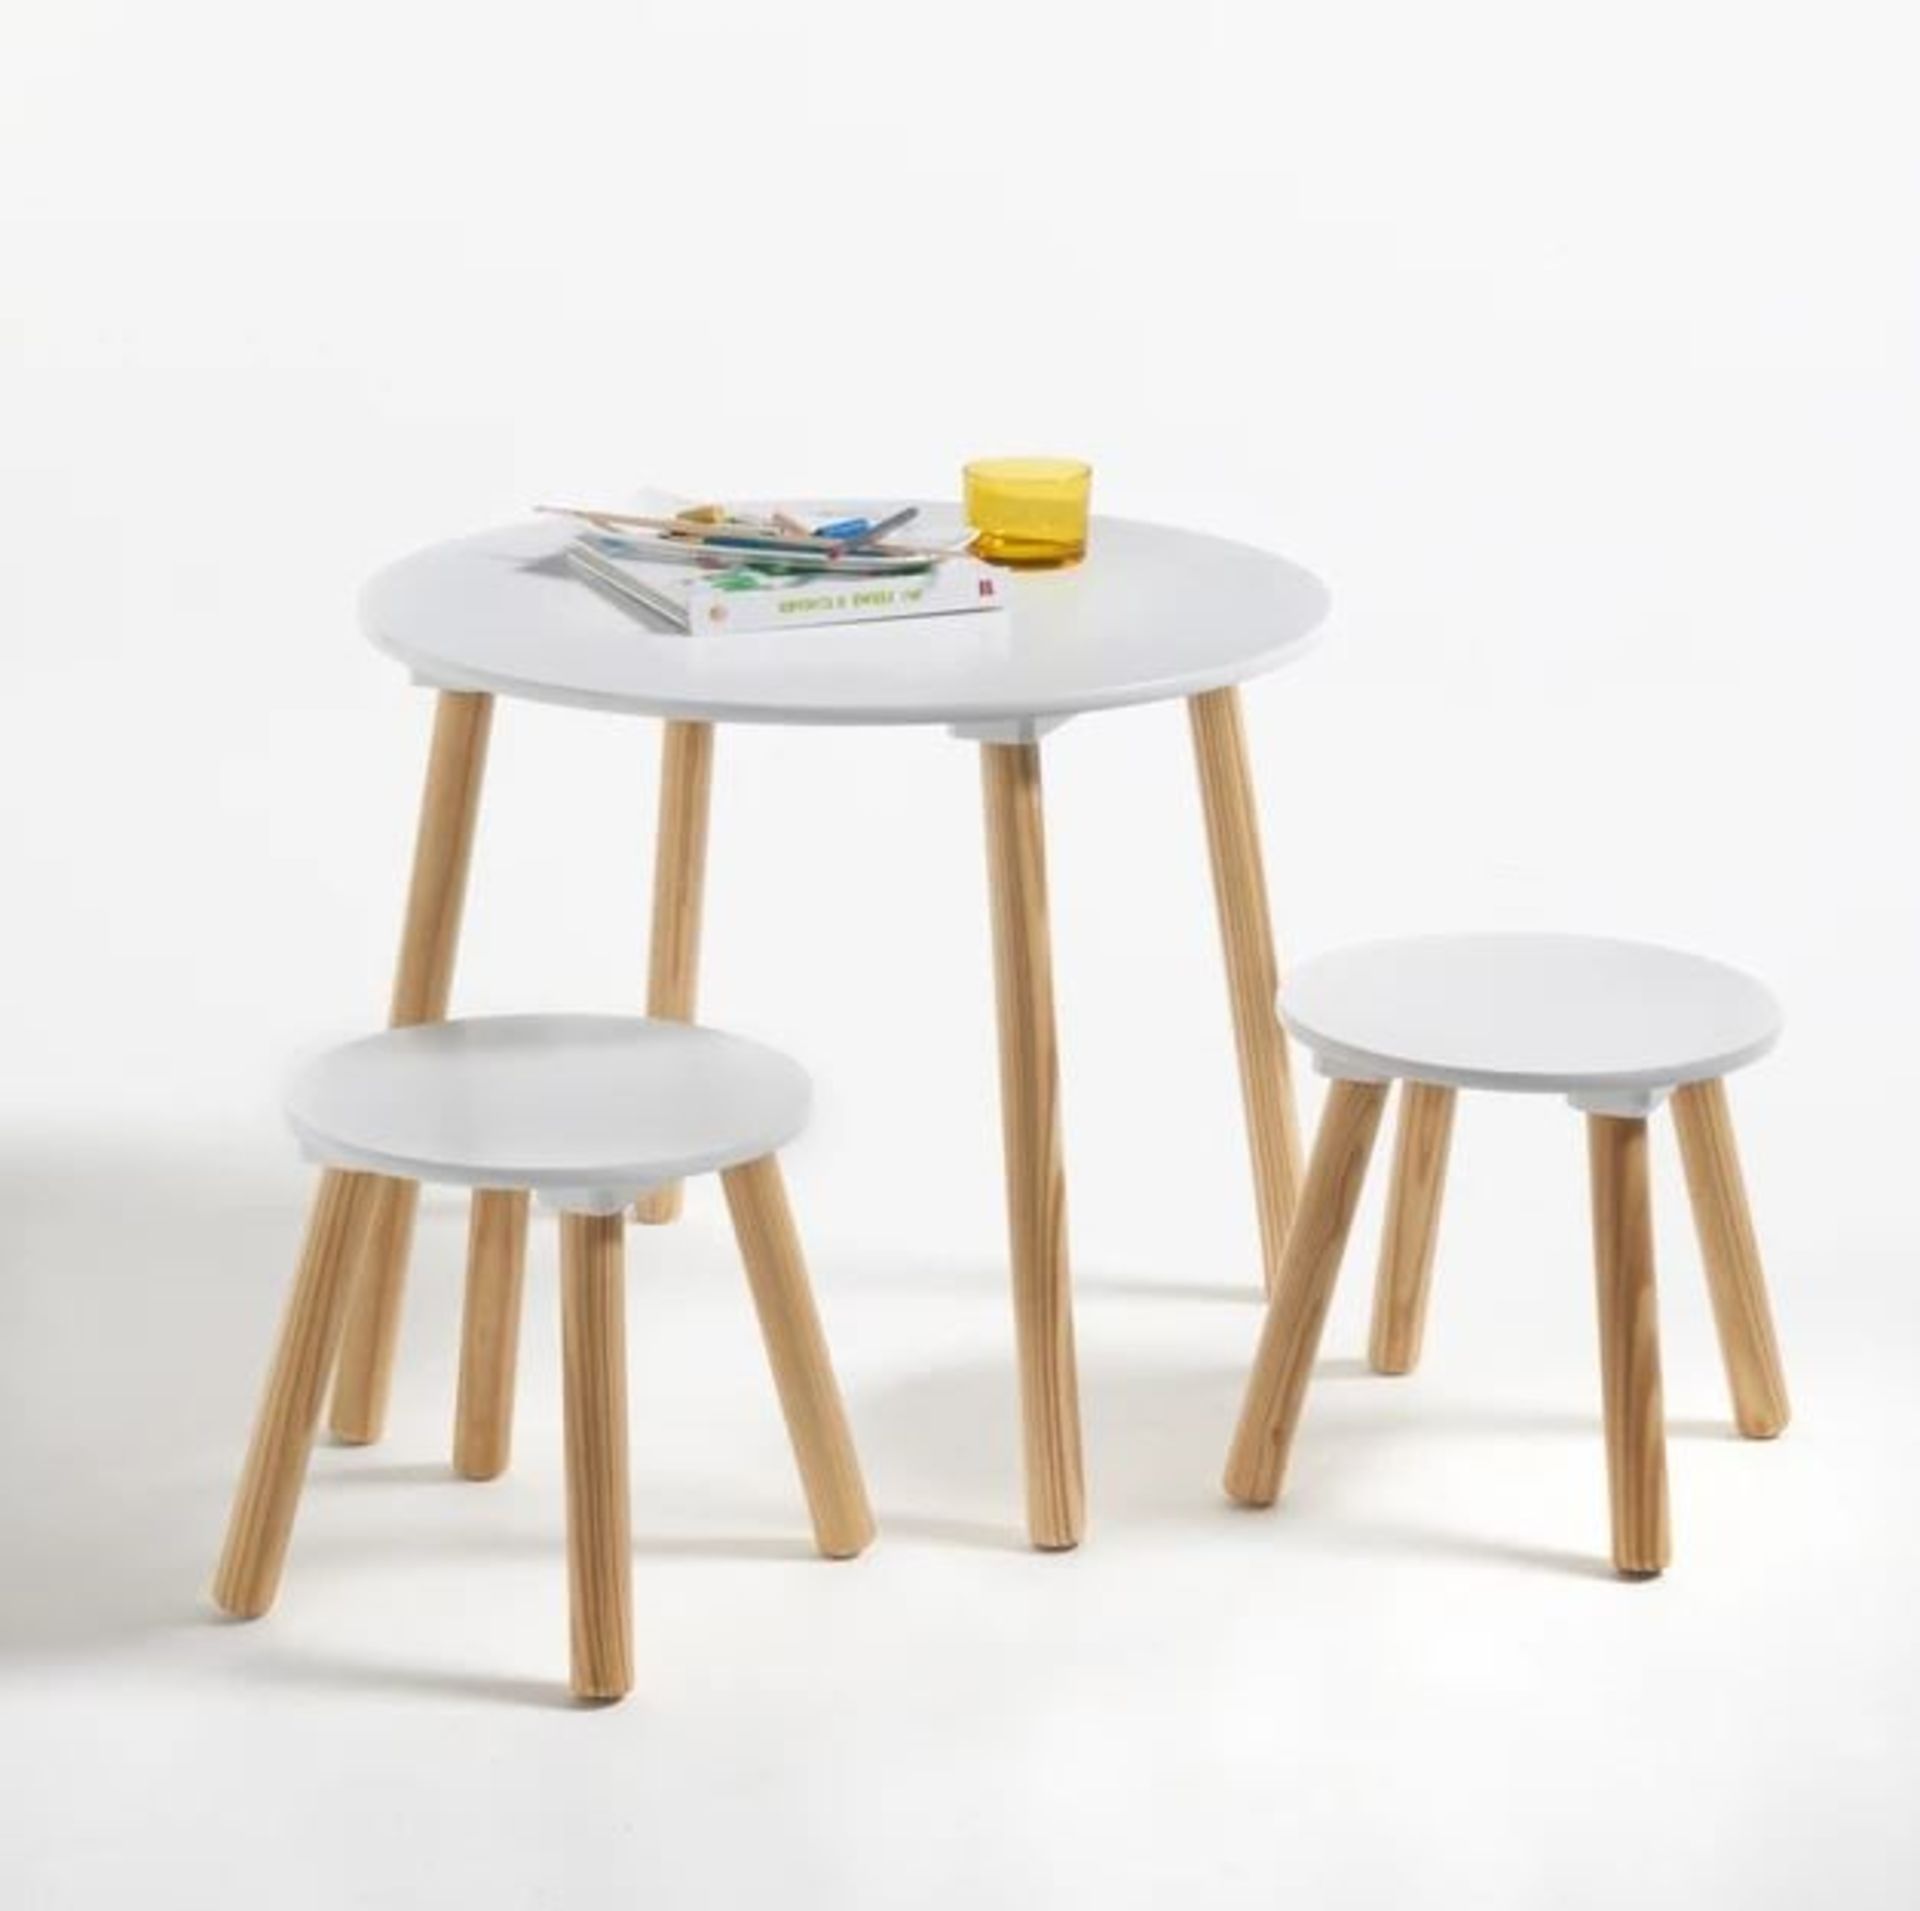 LA REDOUTE JIMI CHILDREN'S TABLE AND STOOLS - Image 2 of 2